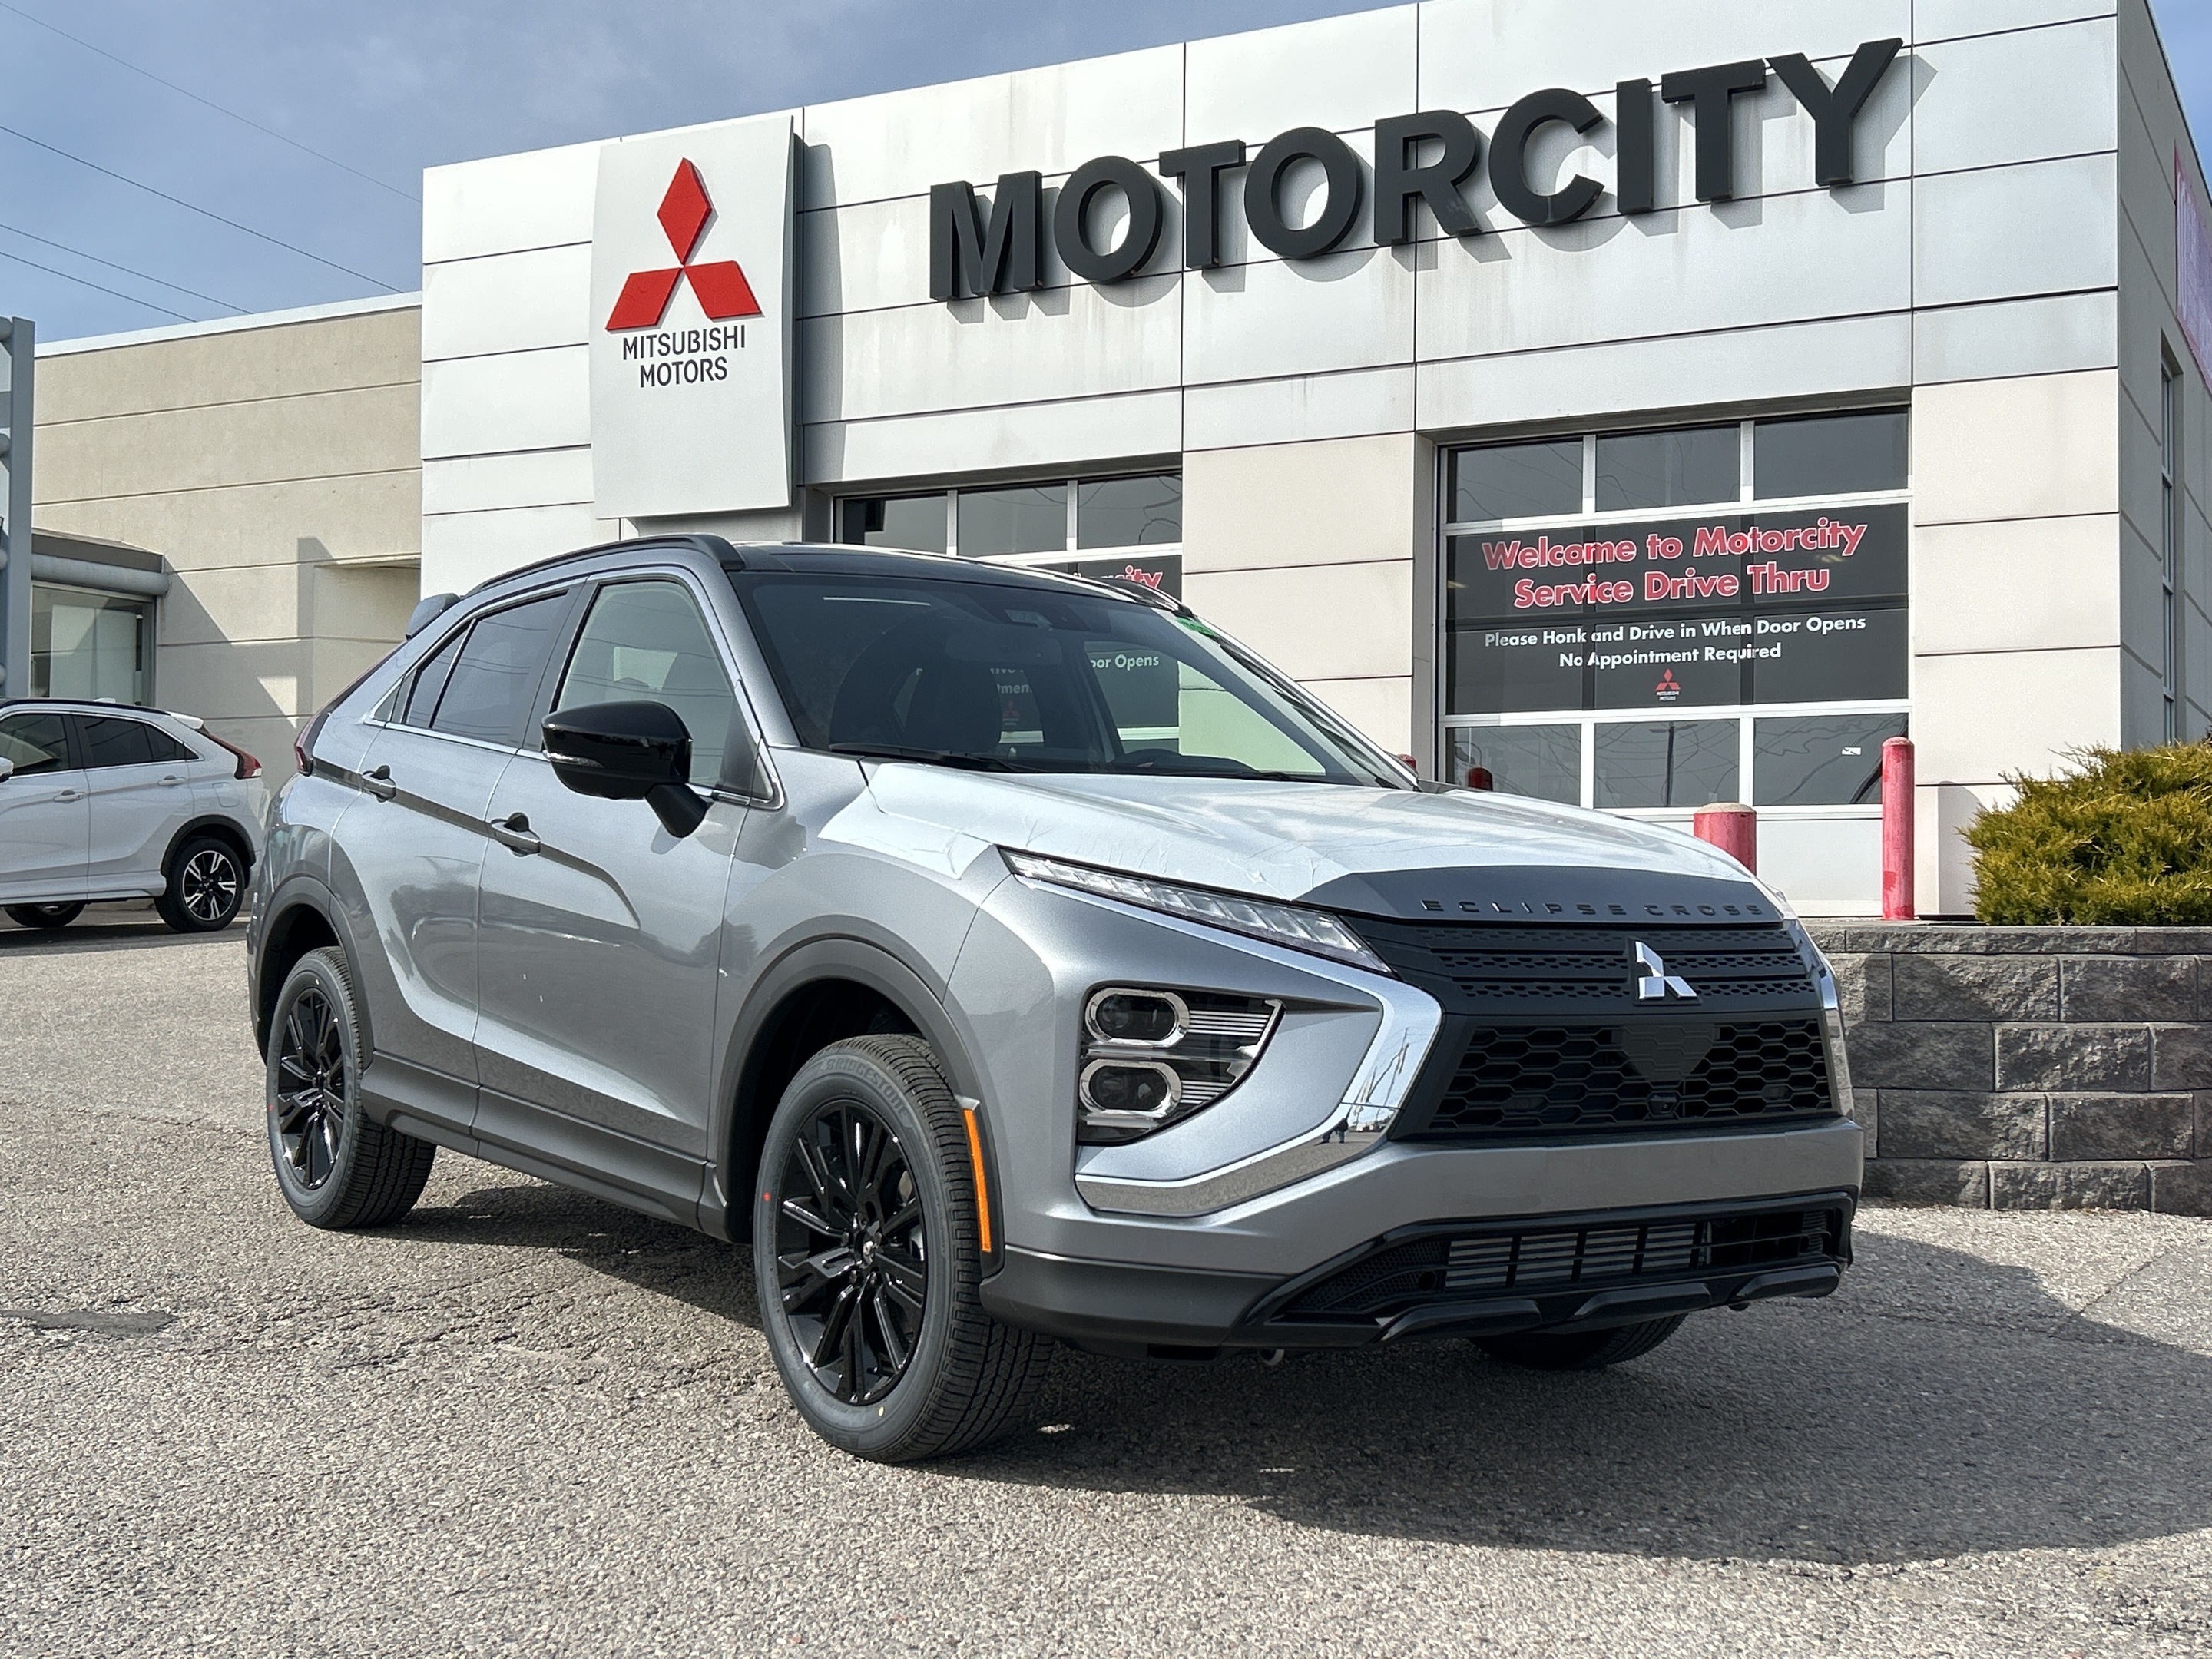 2024 Mitsubishi Eclipse Cross NOIR S-AWC...In Stock and Ready to go! Buy Today!